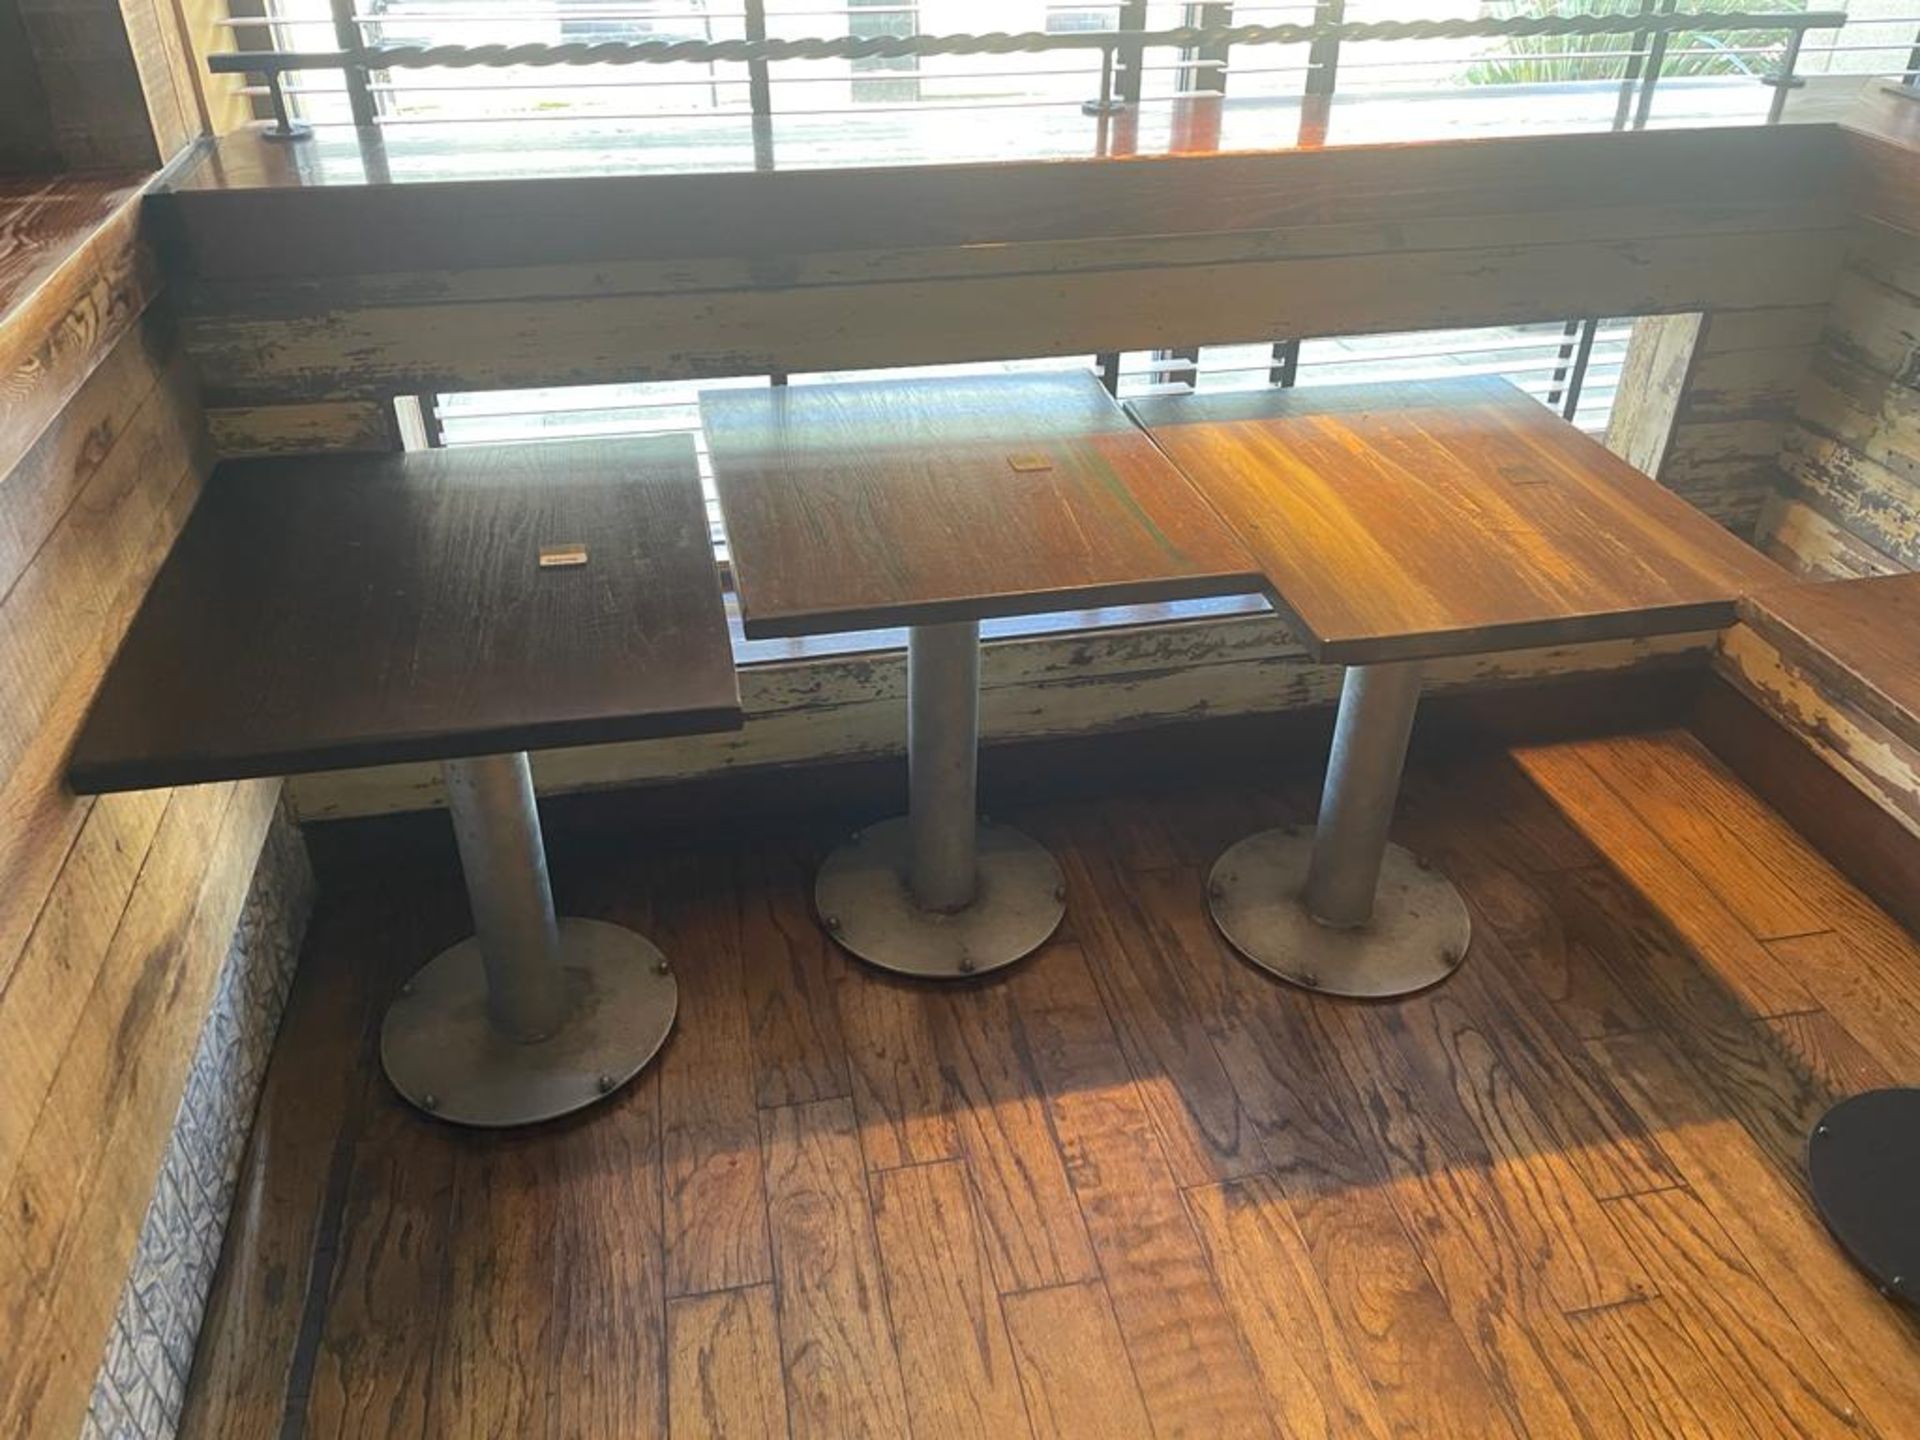 6 x Restaurant Dining Tables Featuring Industrial Style Bases and Wood Tops - Dimensions: H73 x - Image 8 of 9